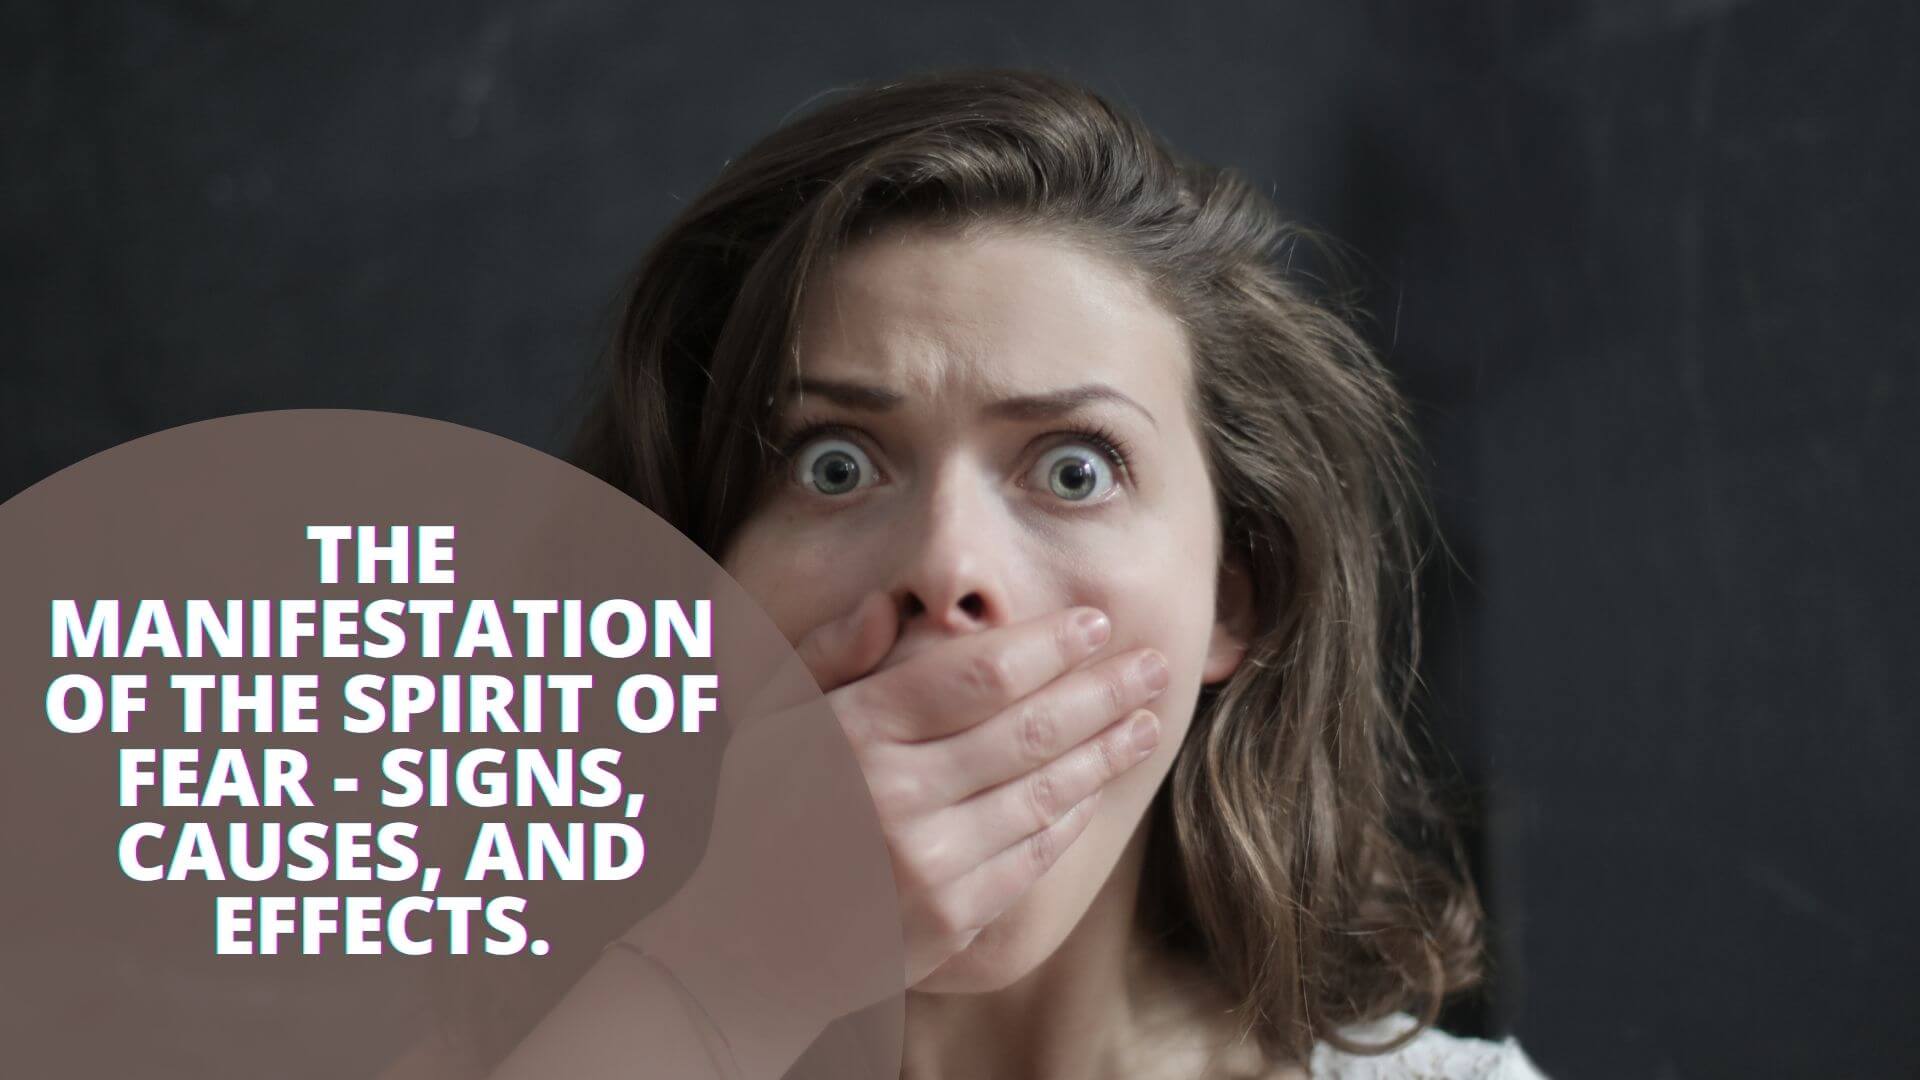 The Manifestation Of The Spirit Of Fear - Signs, Causes, And Effects.